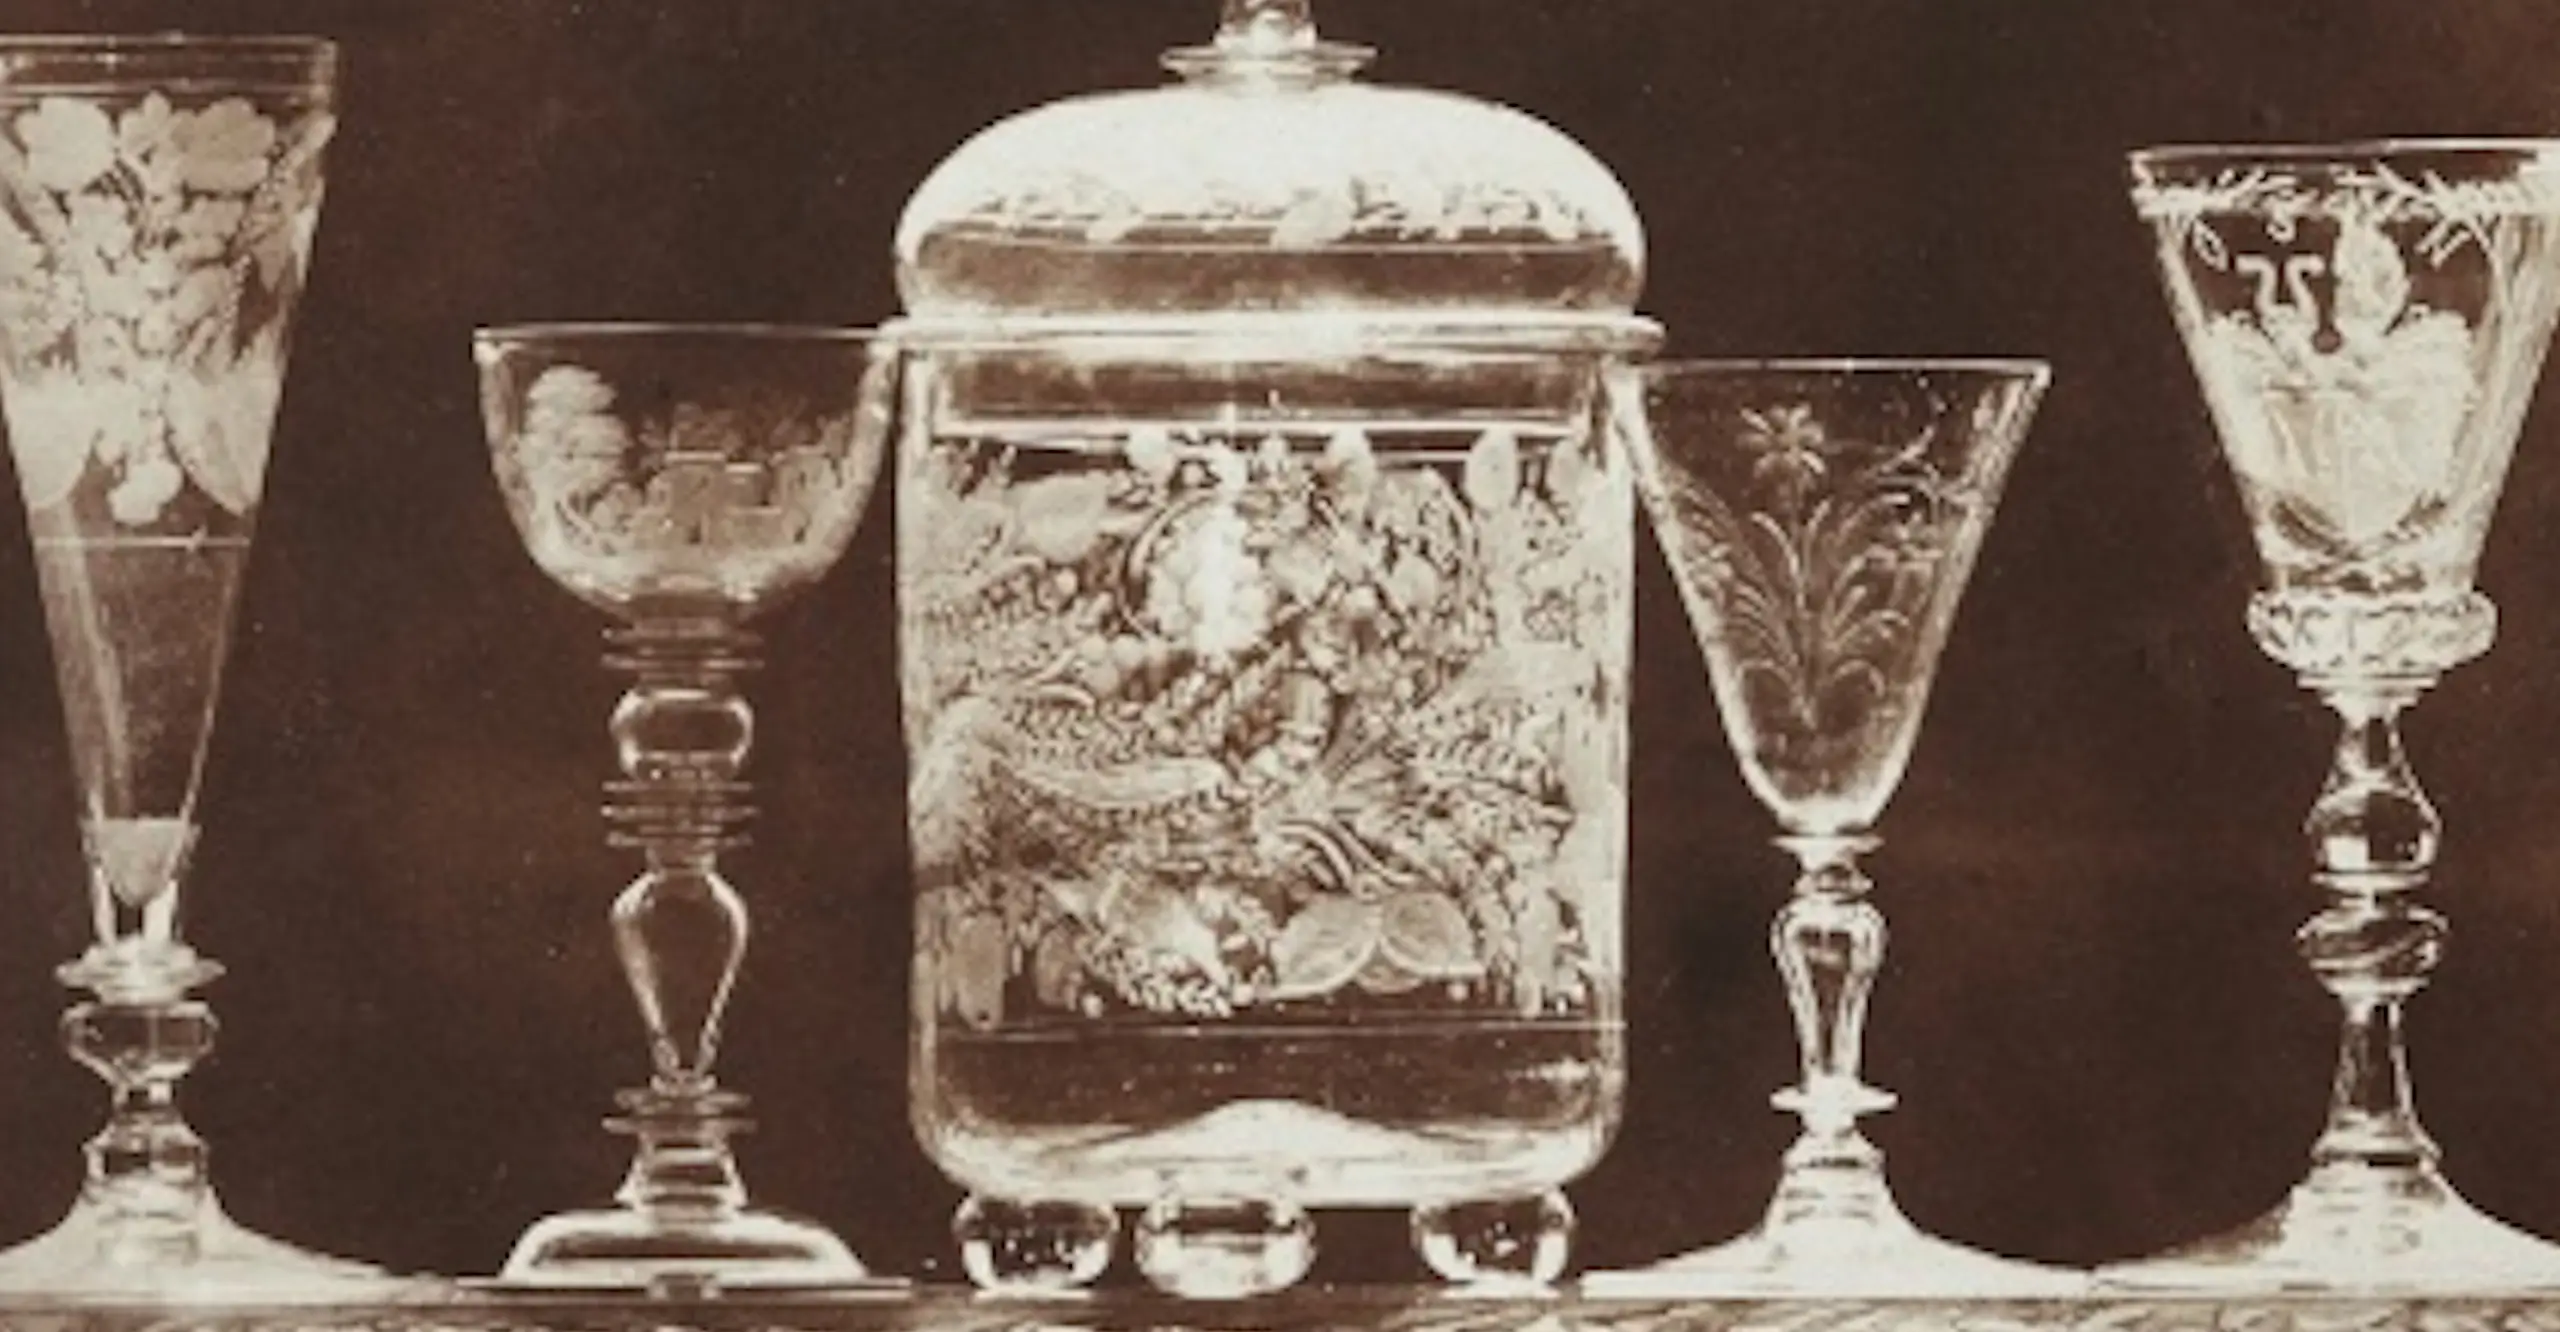 Detail of a brown monochrome photograph of sherry glasses and other glassware lined up on a shelf.